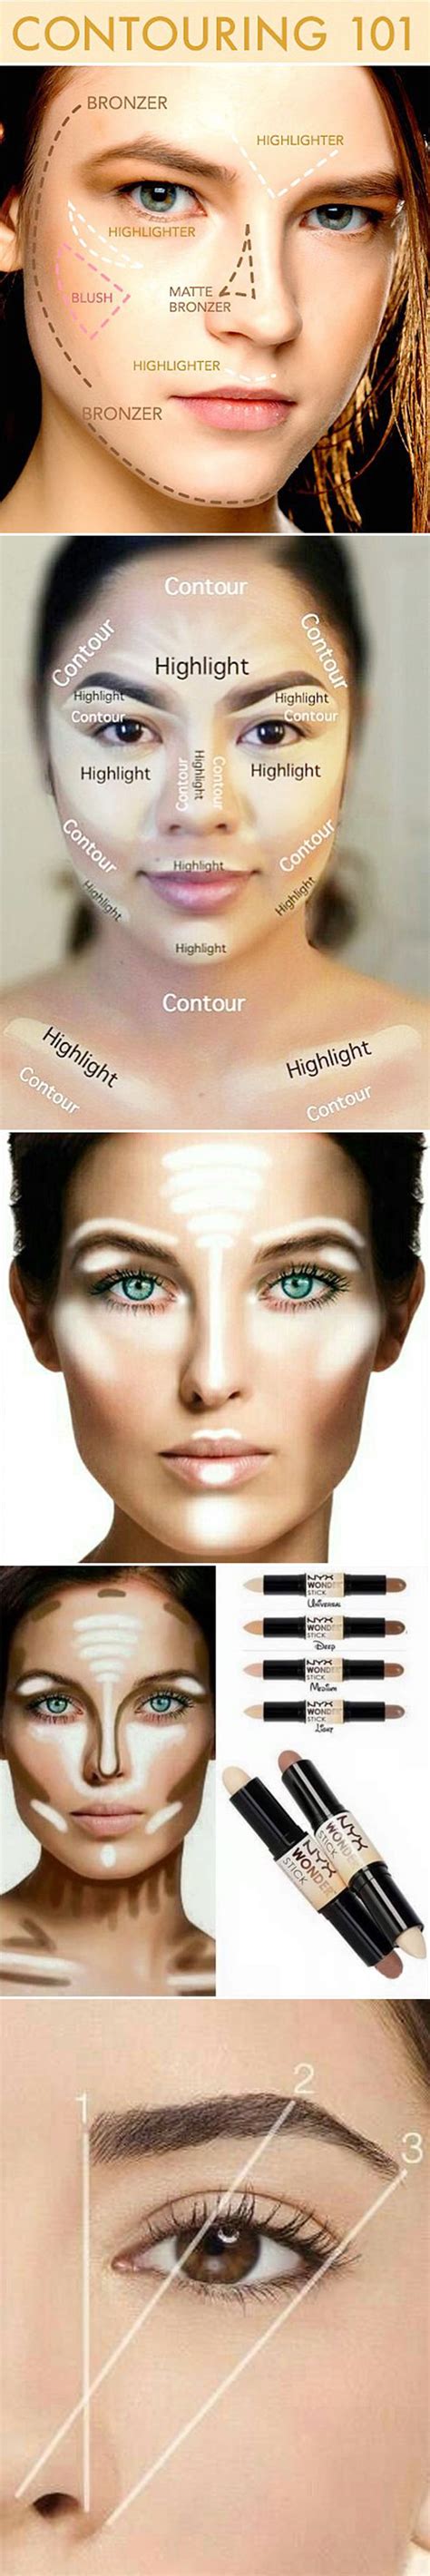 how to contour your face contouring and highlighting